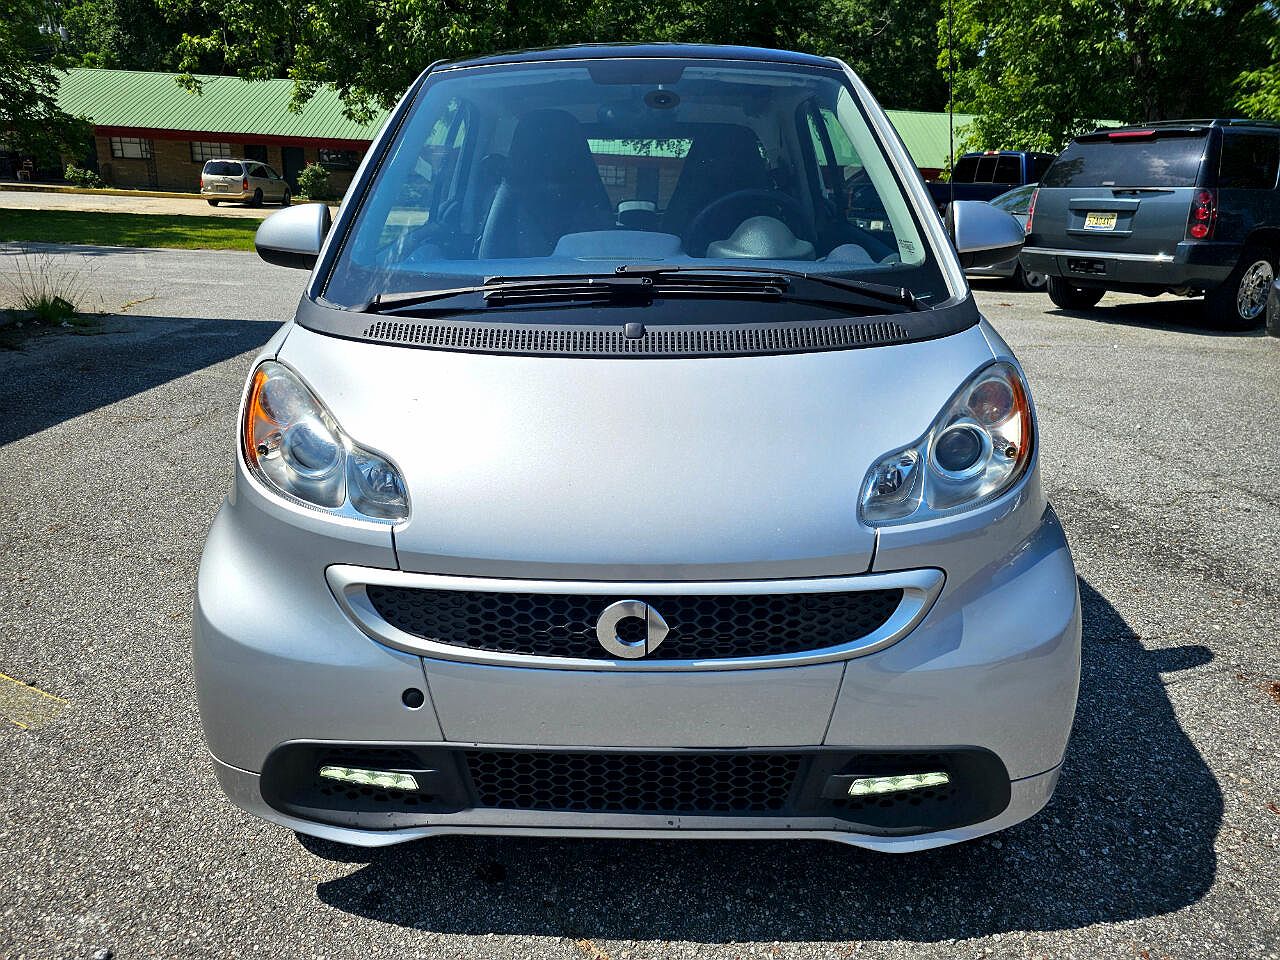 2015 Smart Fortwo Passion image 7